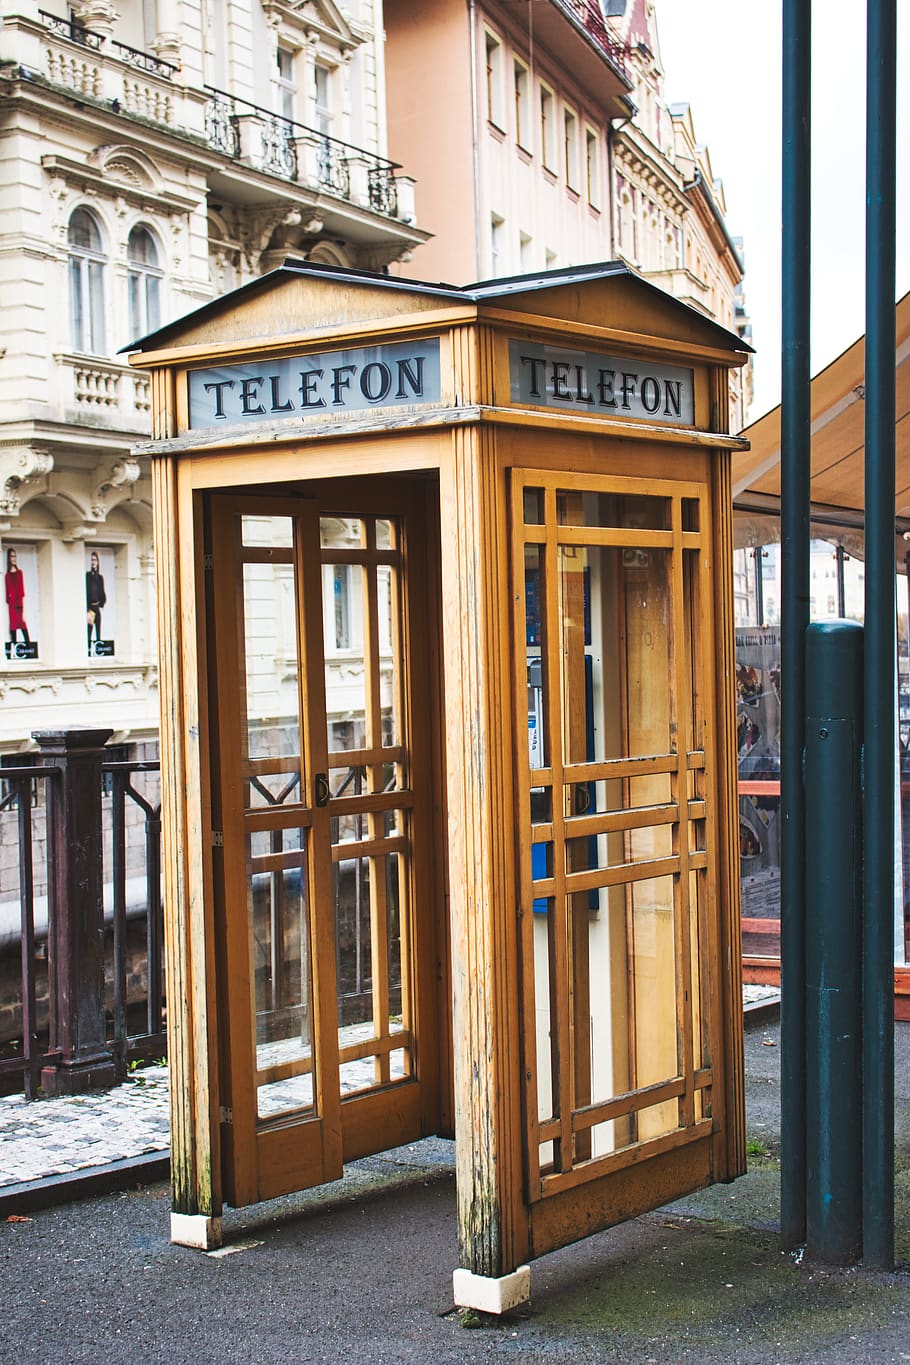 karlovy vary, phone booth, old, spa, lantern, phone, town center, traditional, architecture, built structure